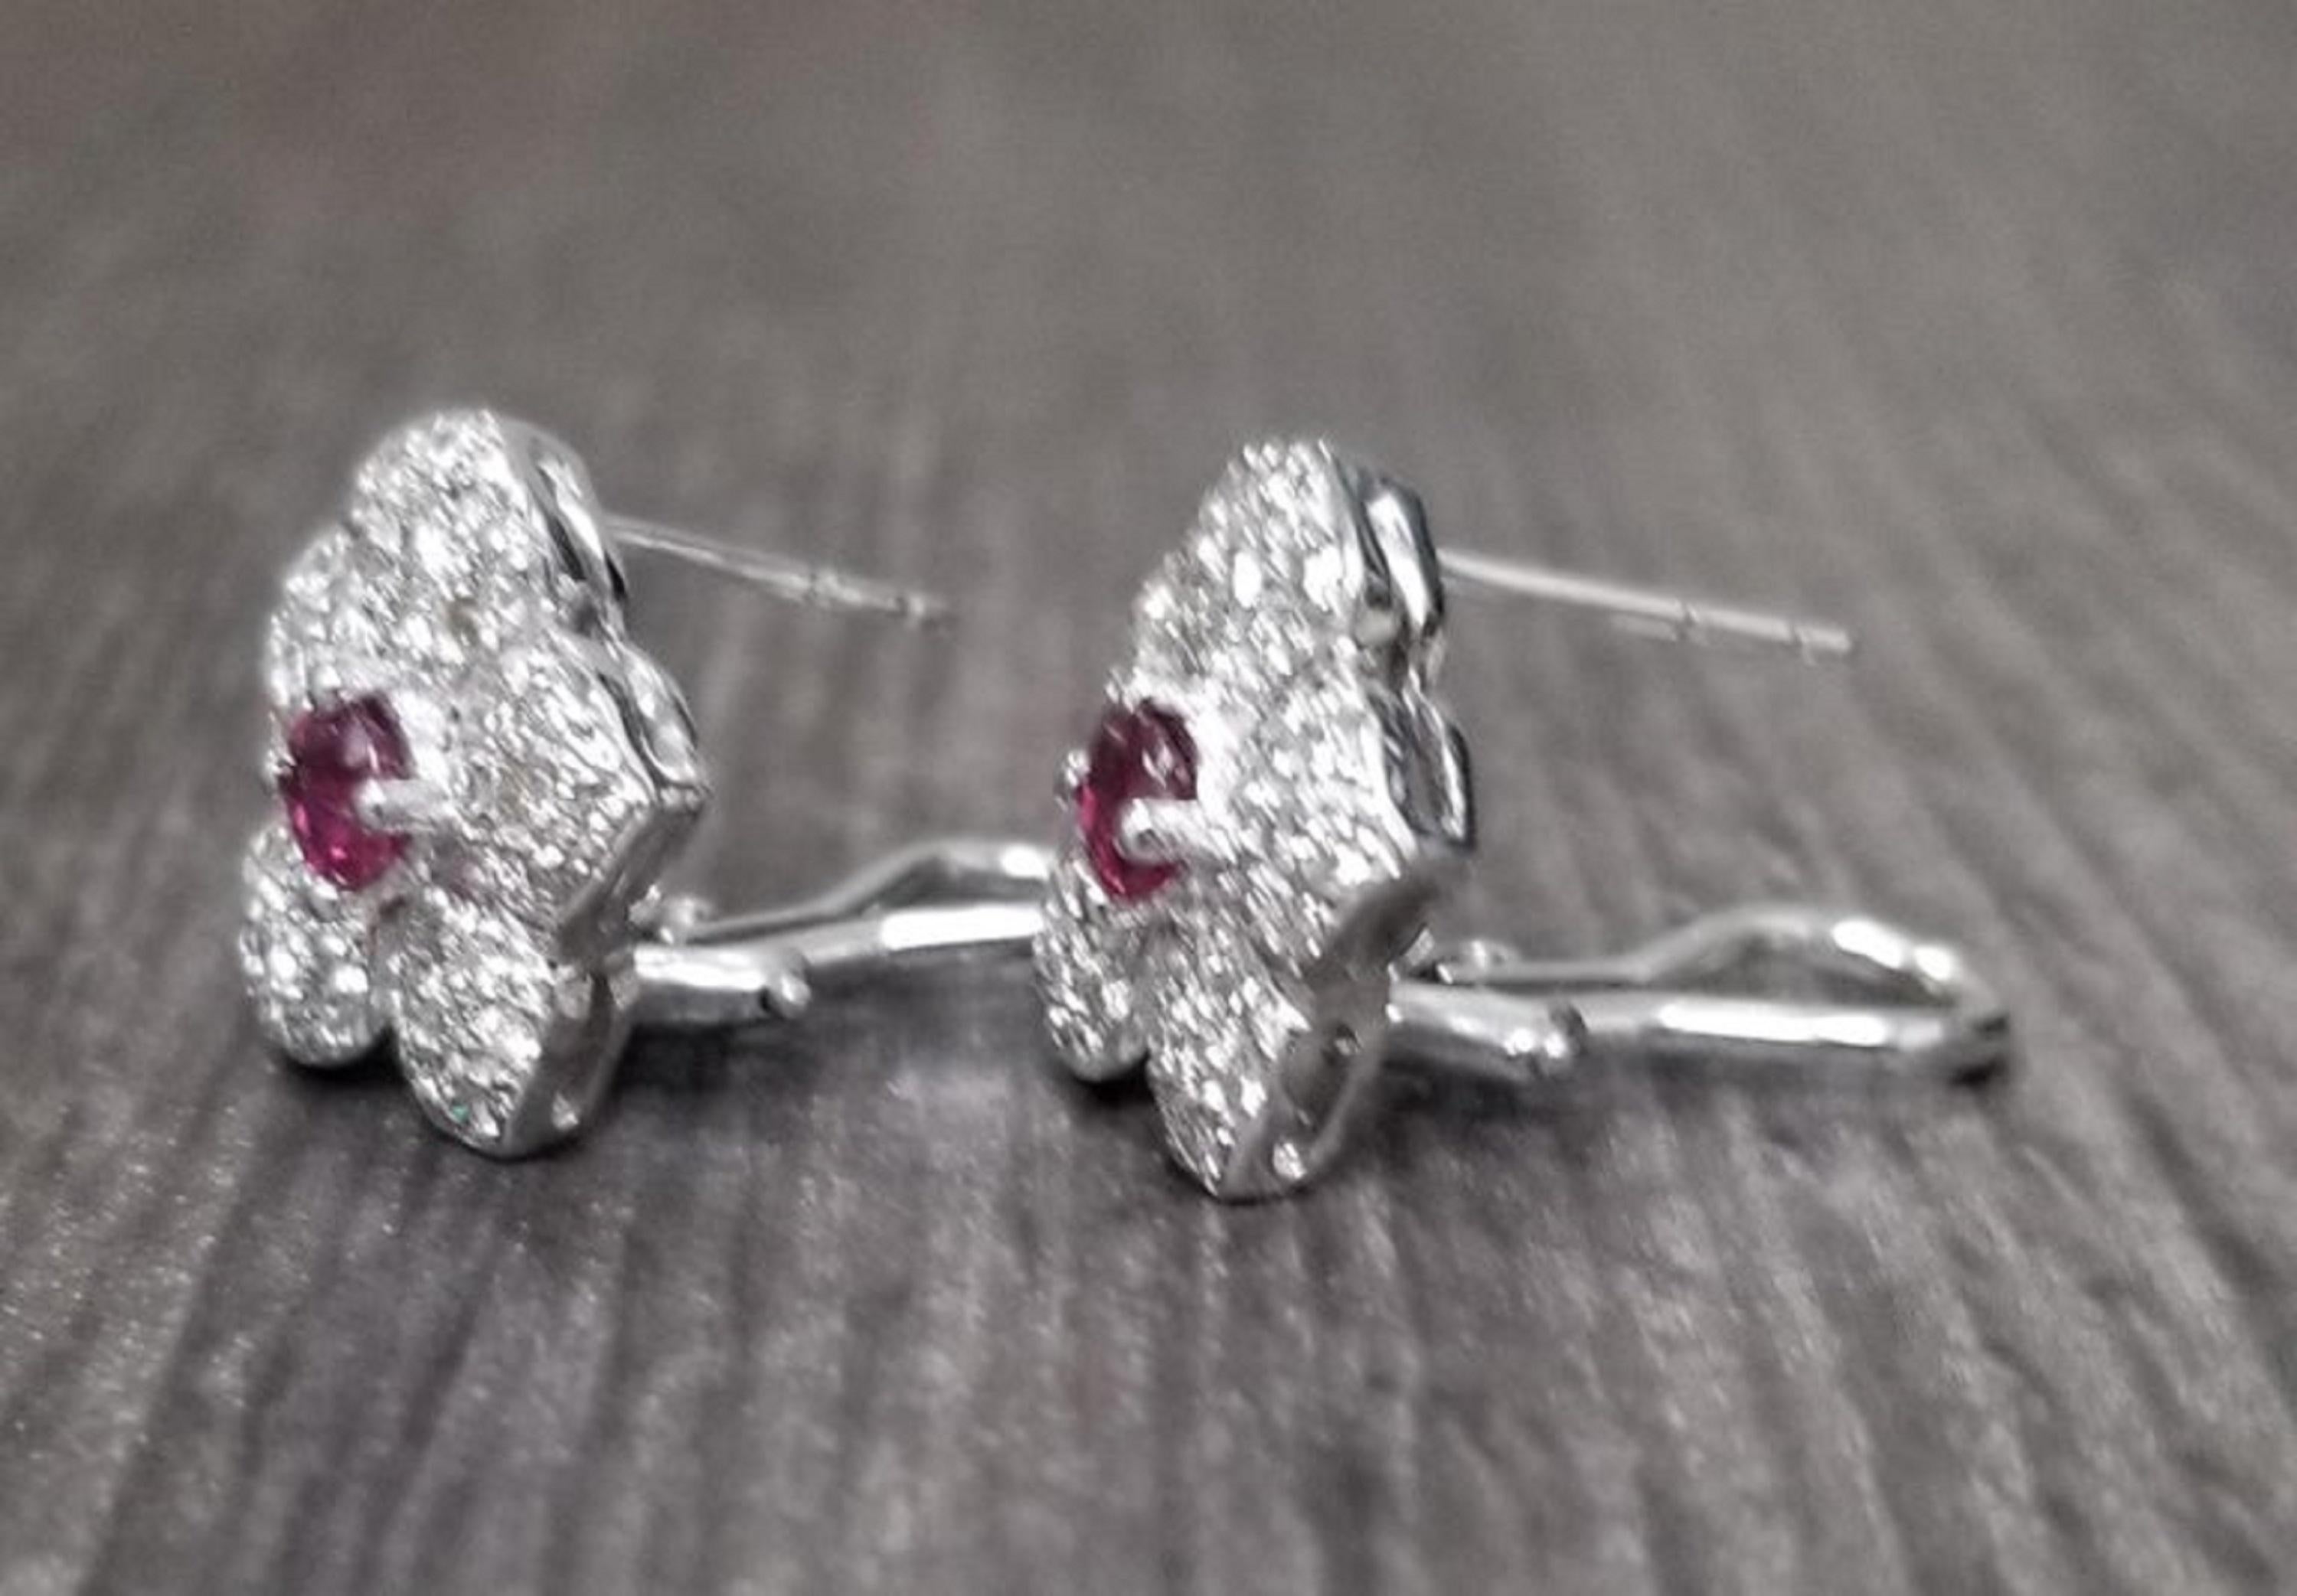 14k white gold ruby and diamond earrings containing 2 round rubies of gem quality weighing .46pts. and 70 round full cut diamonds of very fine quality weighing .80pts. paved in a floral with 14k white gold omega backs for comfort.
* pick a gemstone